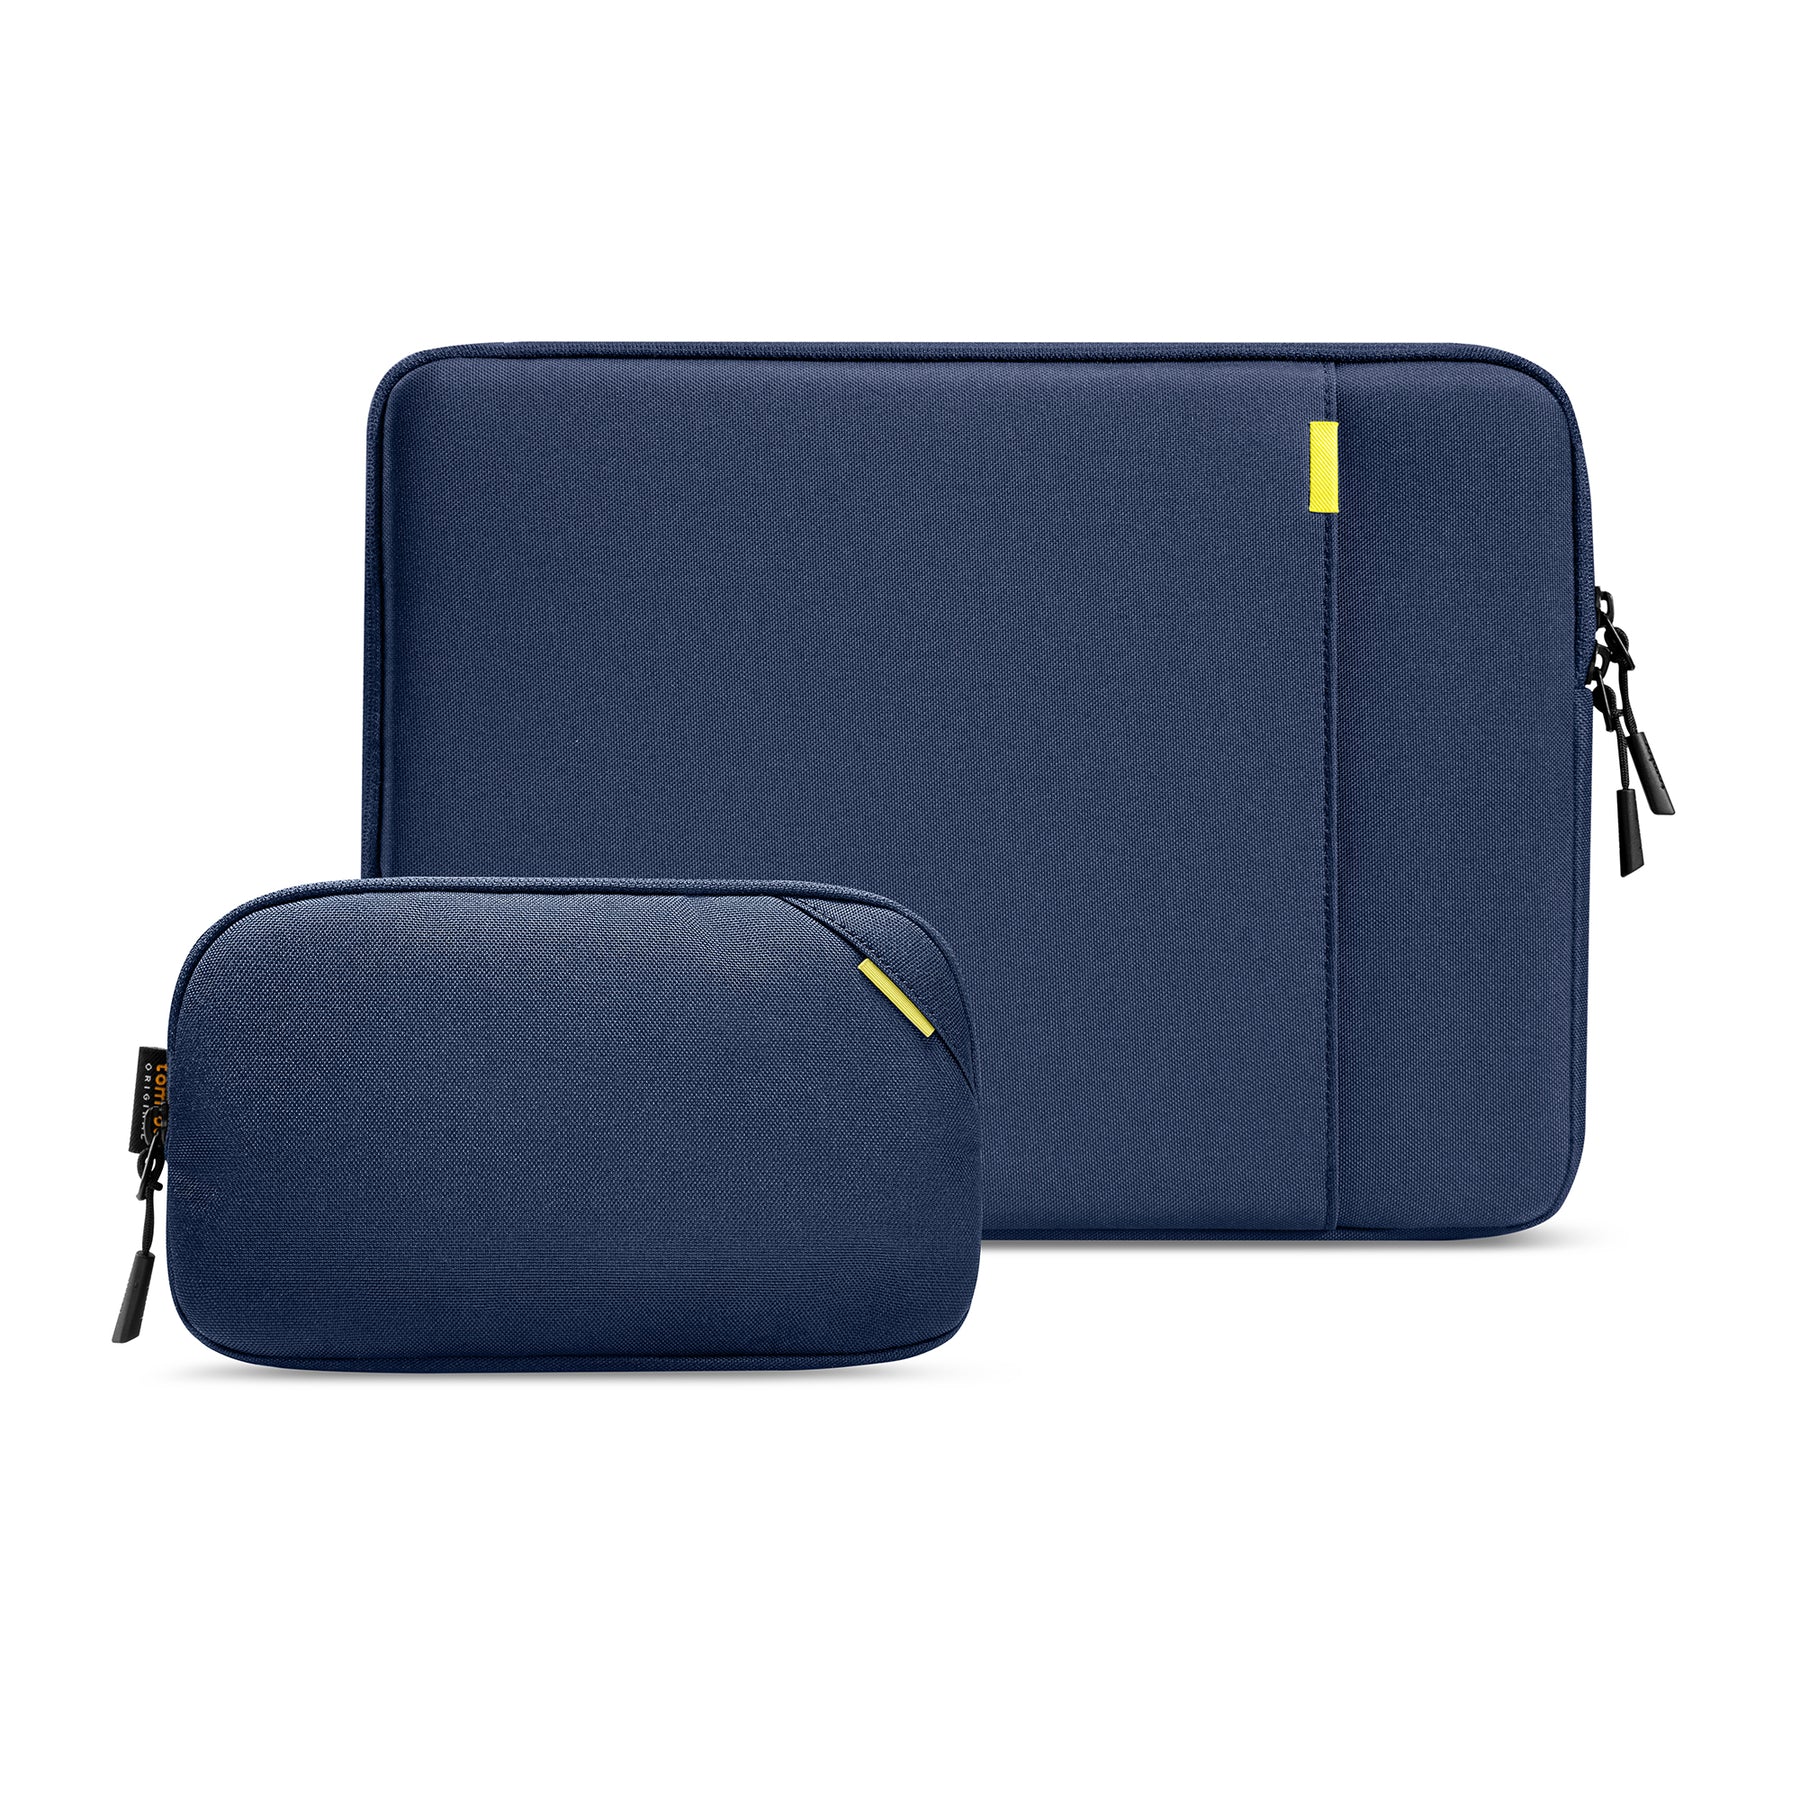 tomtoc 13 Inch Versatile 360 Protective Laptop Sleeve with Pouch - Navy Blue